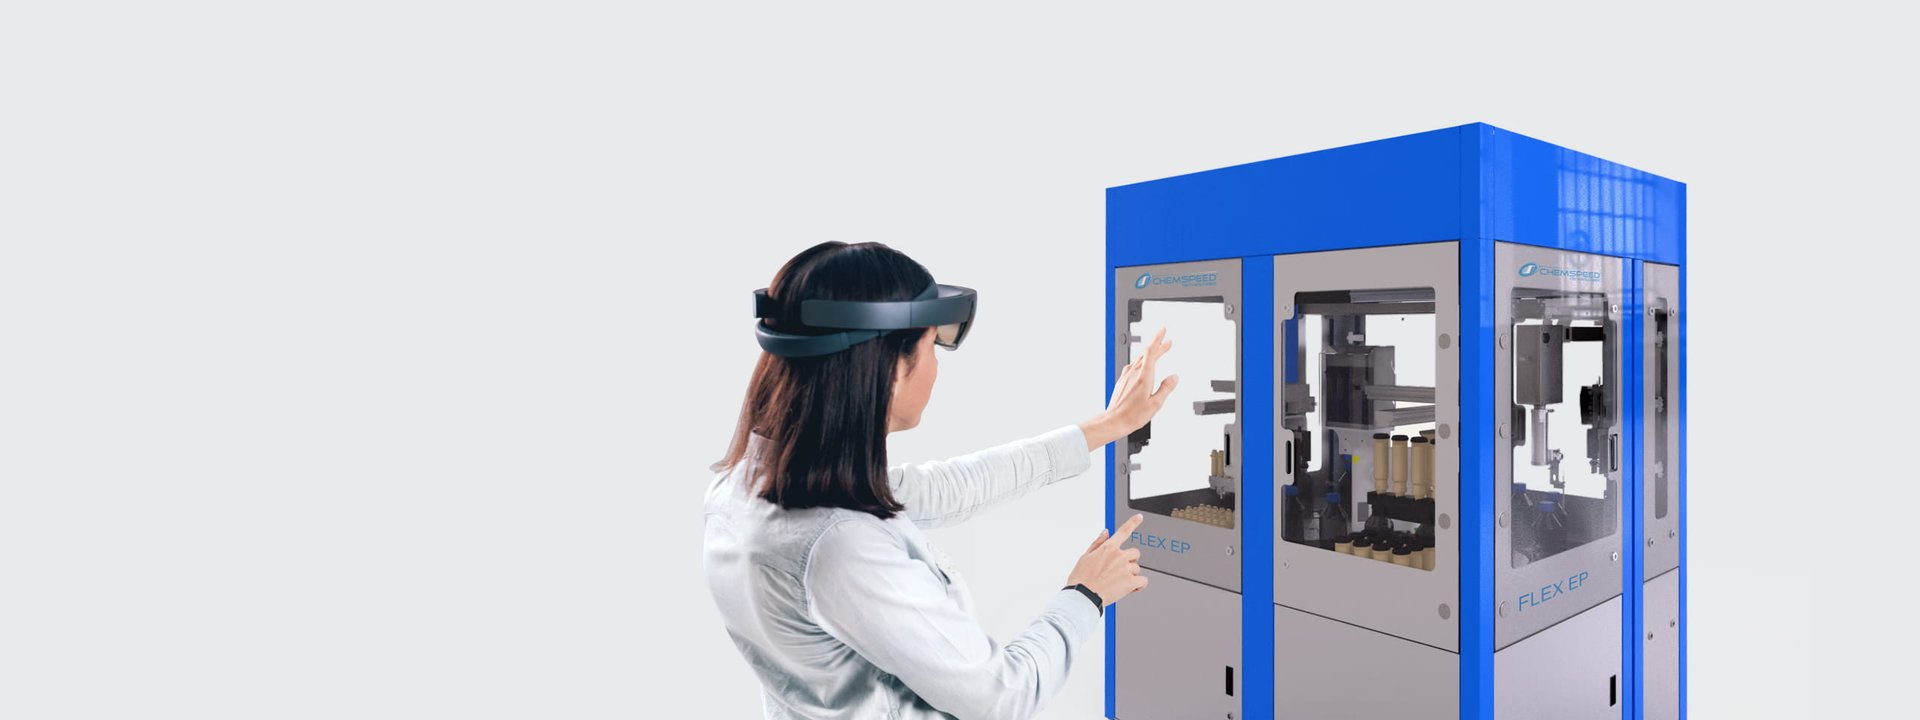 A female scientist with brown hair wearing an AR hololens and gesturing at a blue and grey Chemspeed robotic system